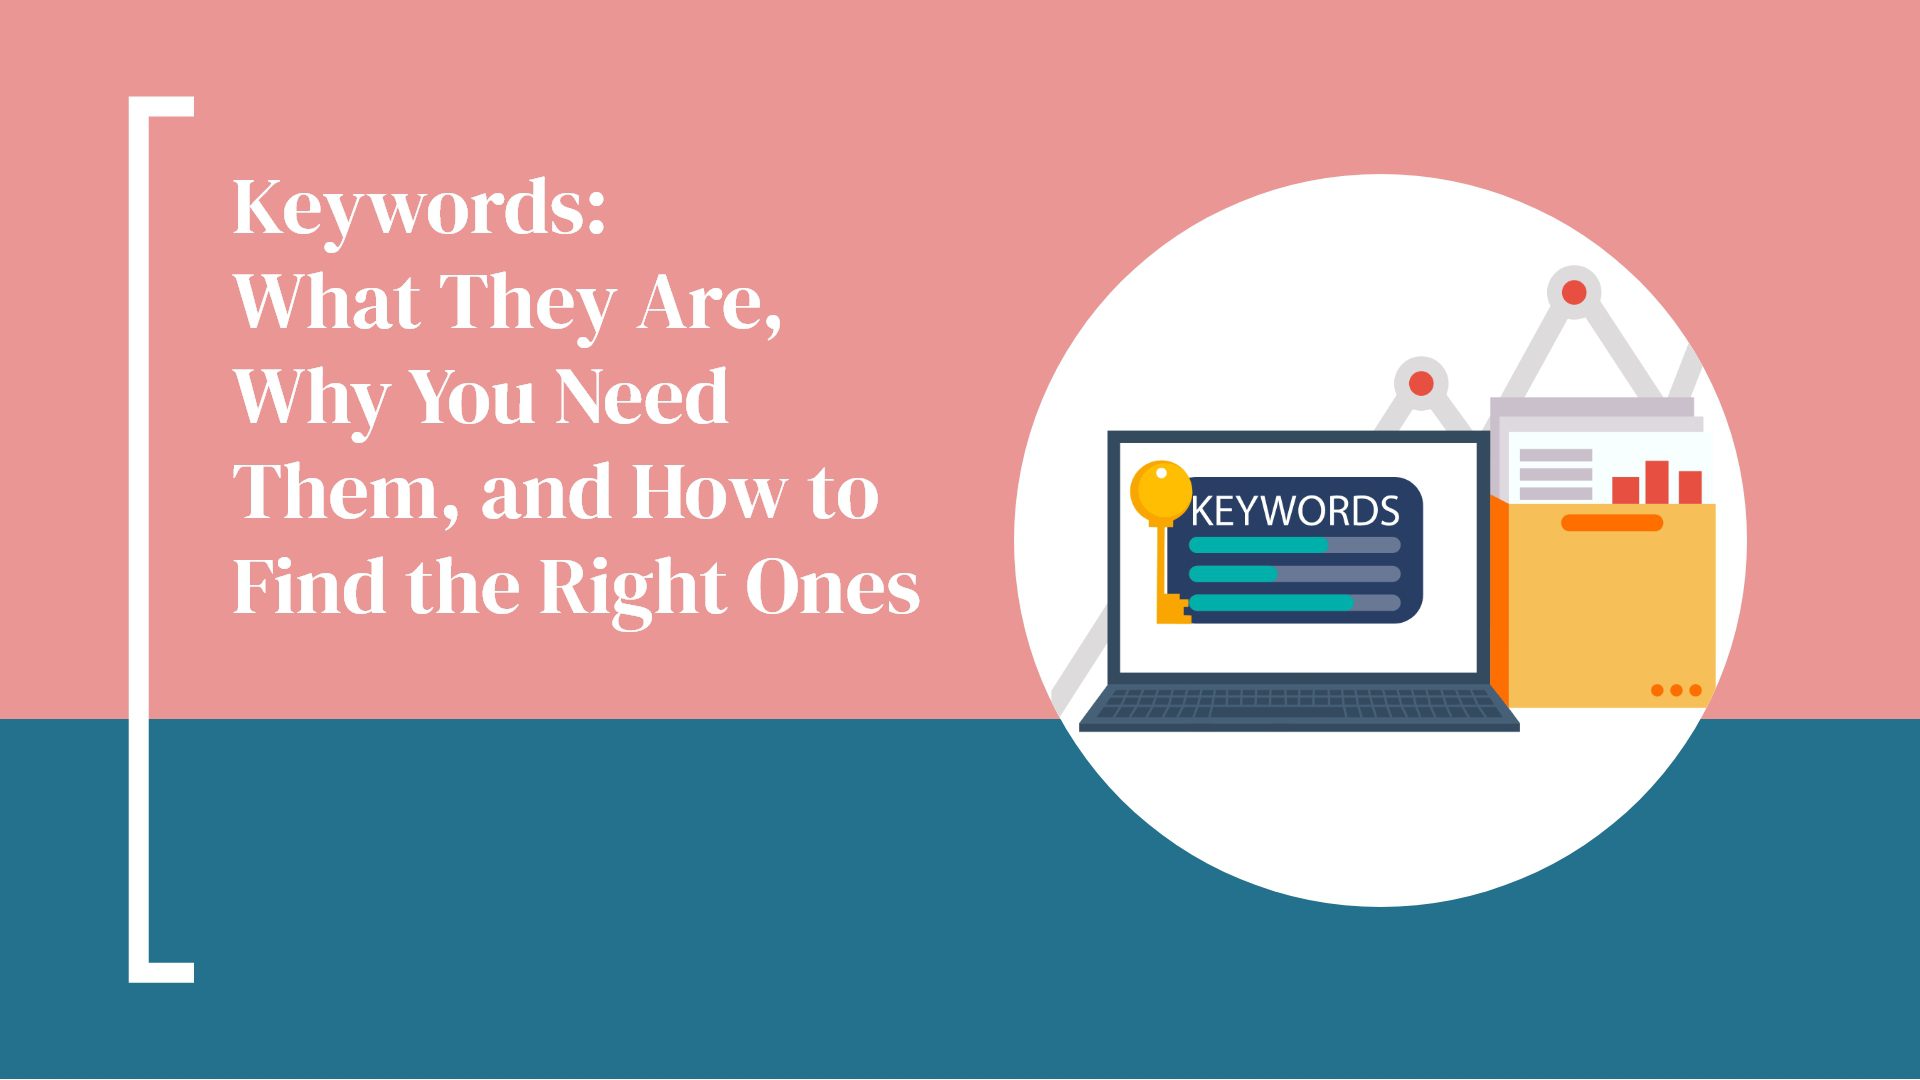 Keywords: What They Are, Why You Need Them, and How to Find the Right Ones